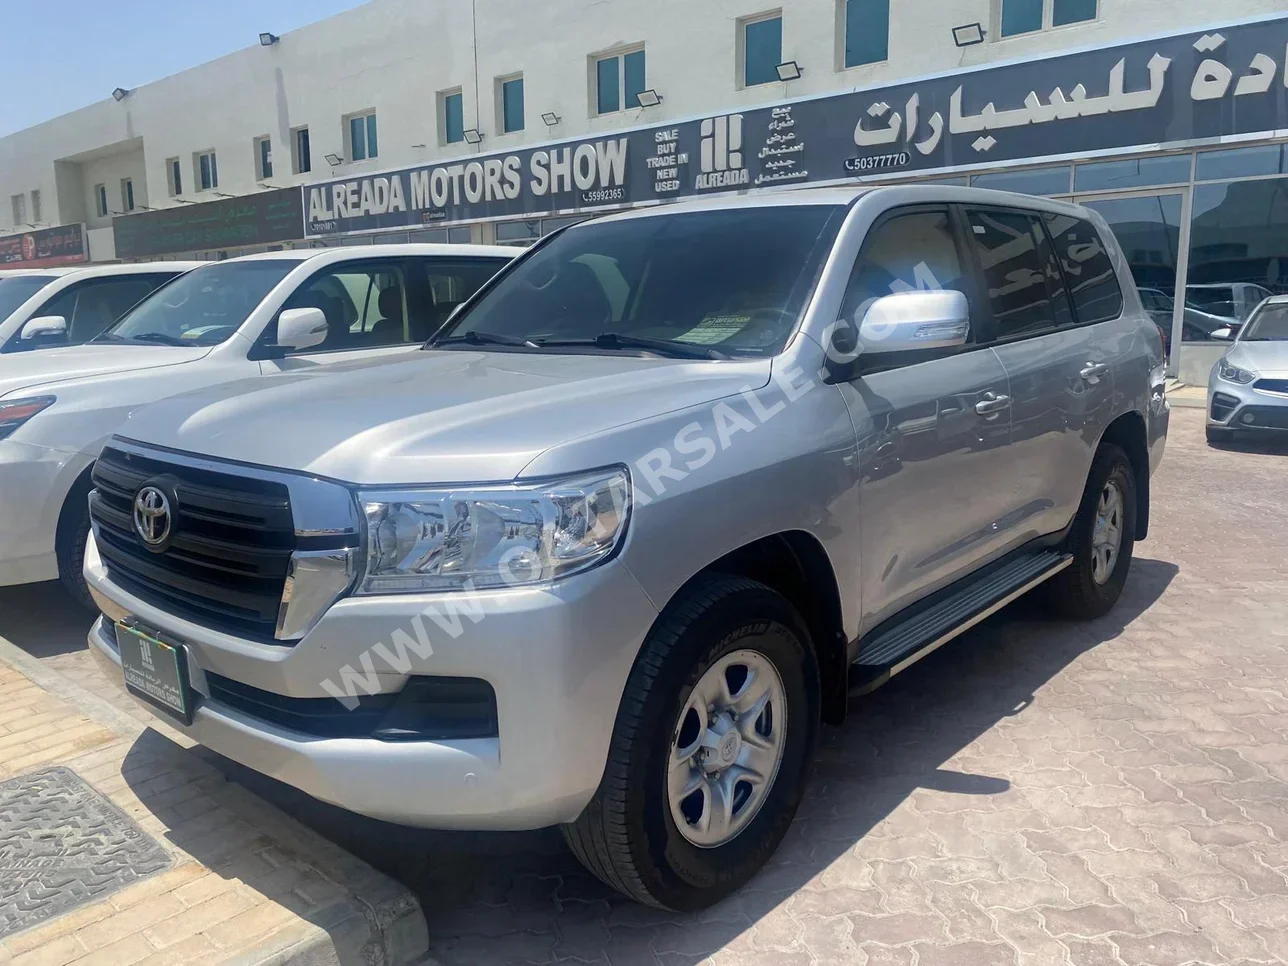 Toyota  Land Cruiser  G  2017  Automatic  273,000 Km  6 Cylinder  Four Wheel Drive (4WD)  SUV  Silver